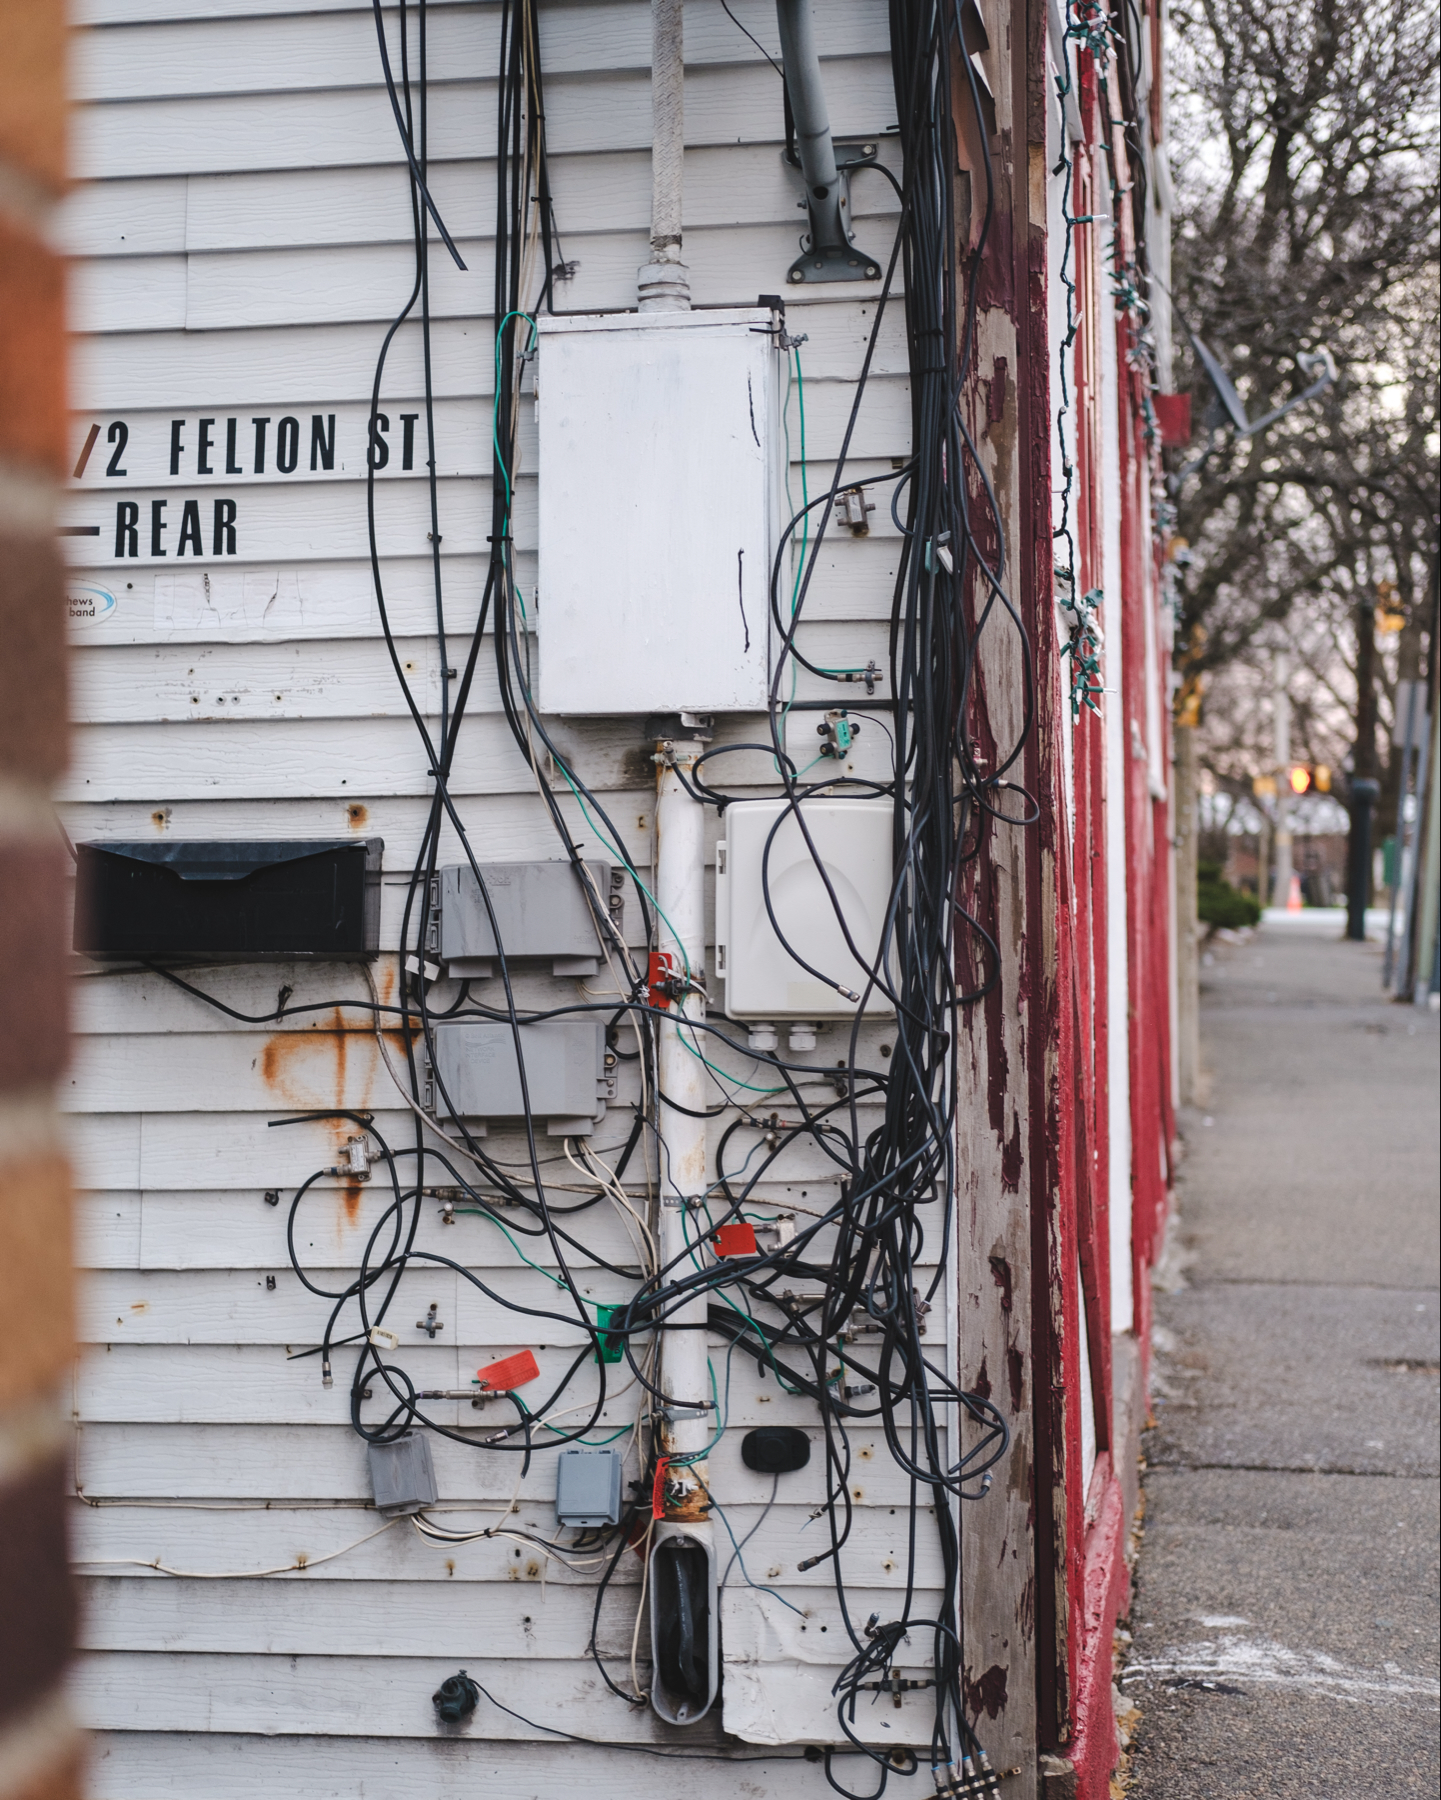 A cluttered array of electrical wires and boxes on the corner of a multi family home. The building shows signs of weathering. A sidewalk passes the front of the building. 